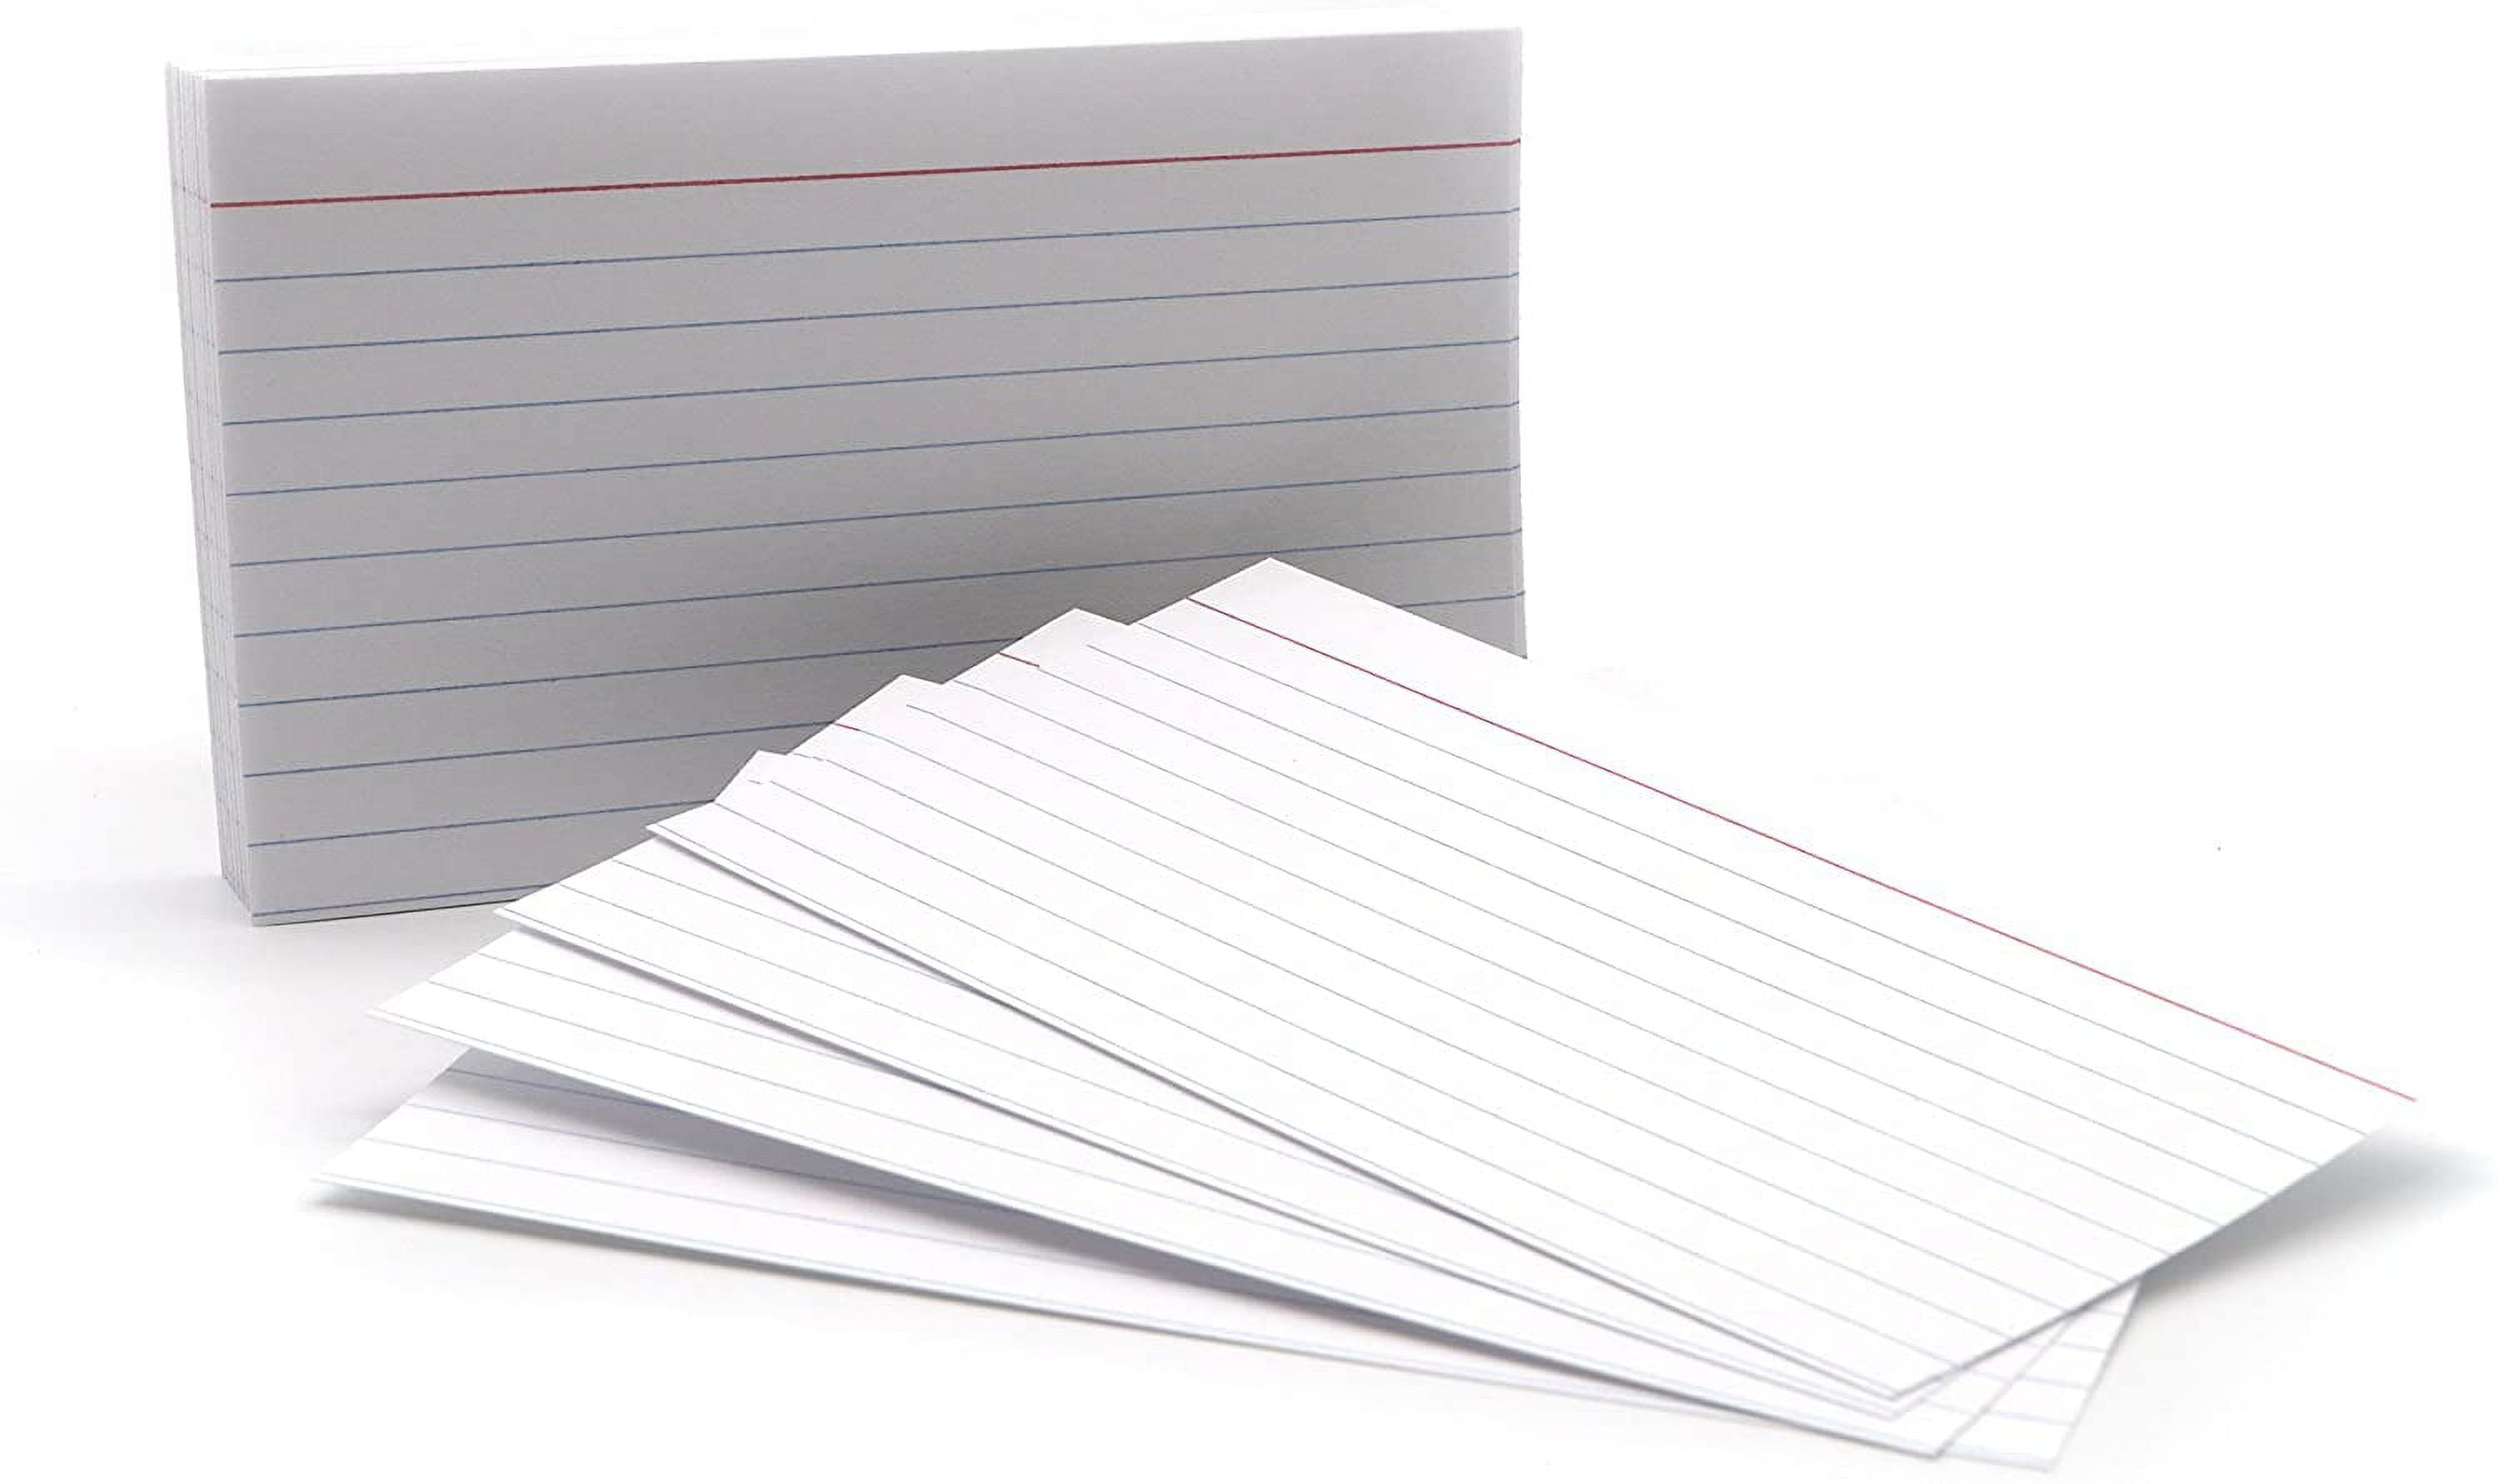 Home Advantage Ruled White Index Cards, File Lined Note Cards (5x7)